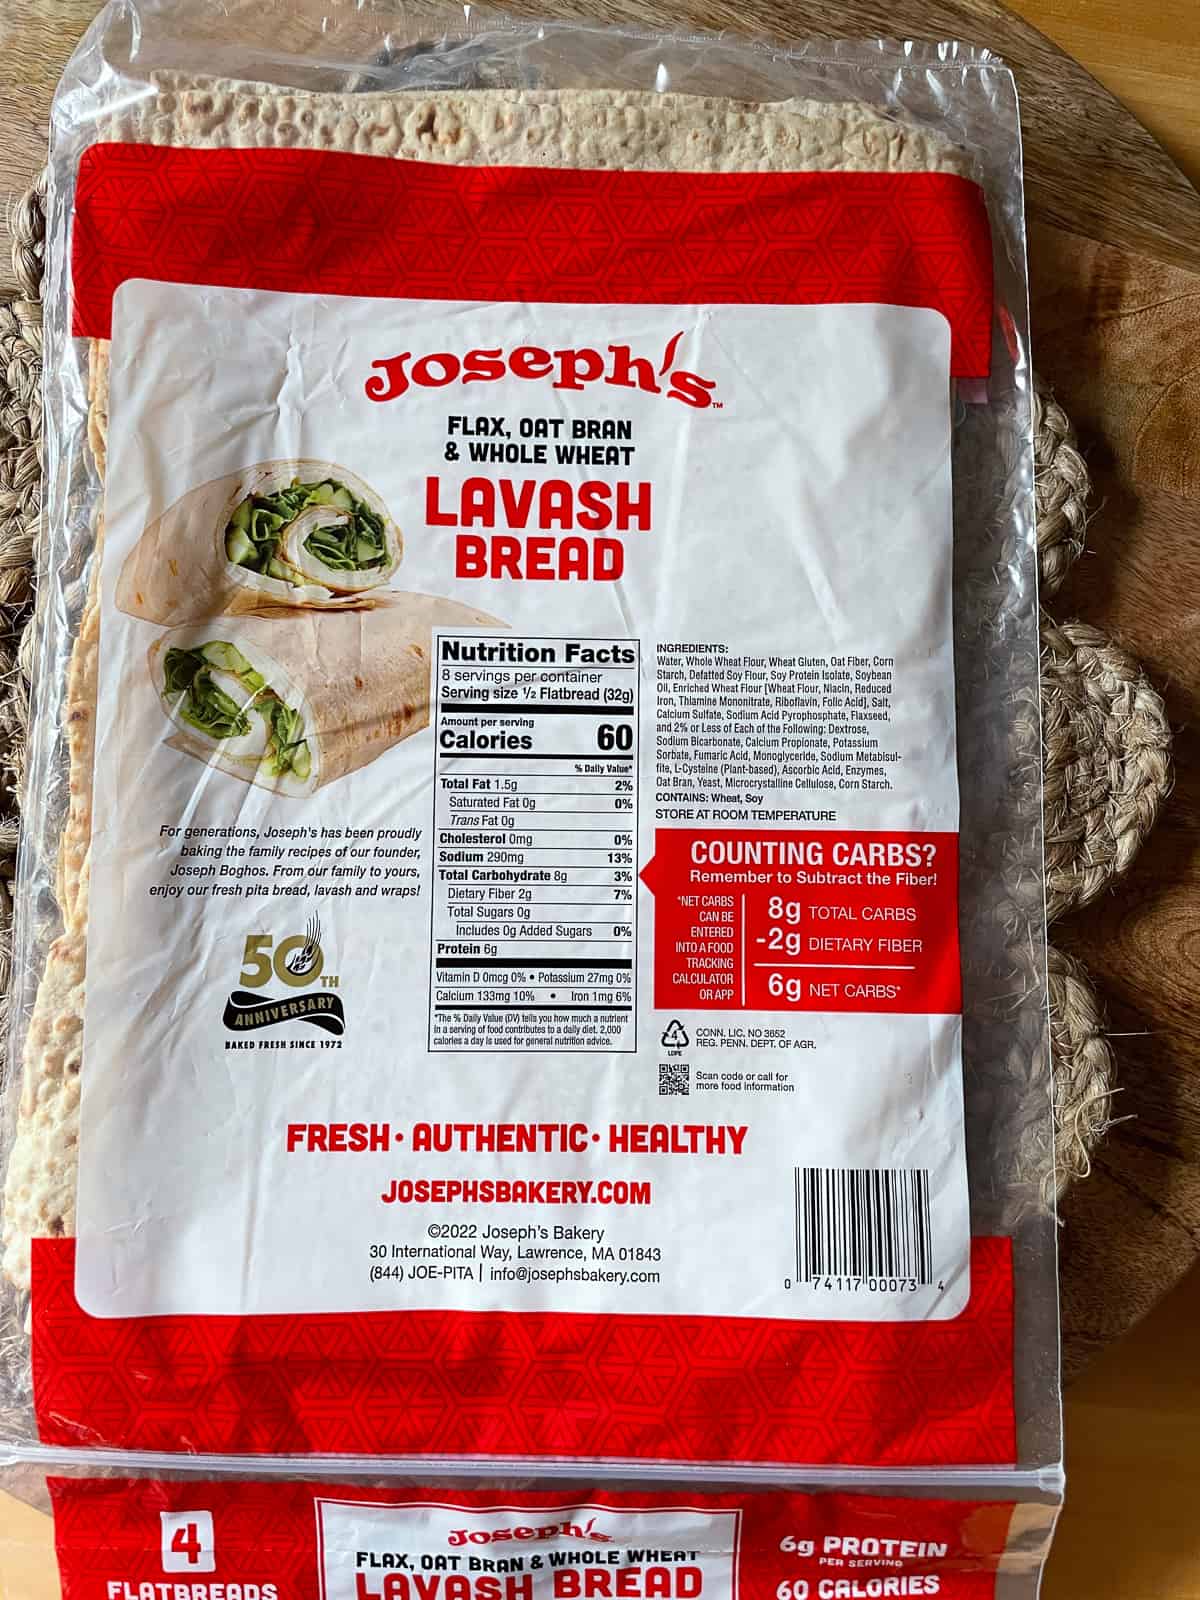 Back of packaging including nutritional information for a package of Joseph's Lavash Bread